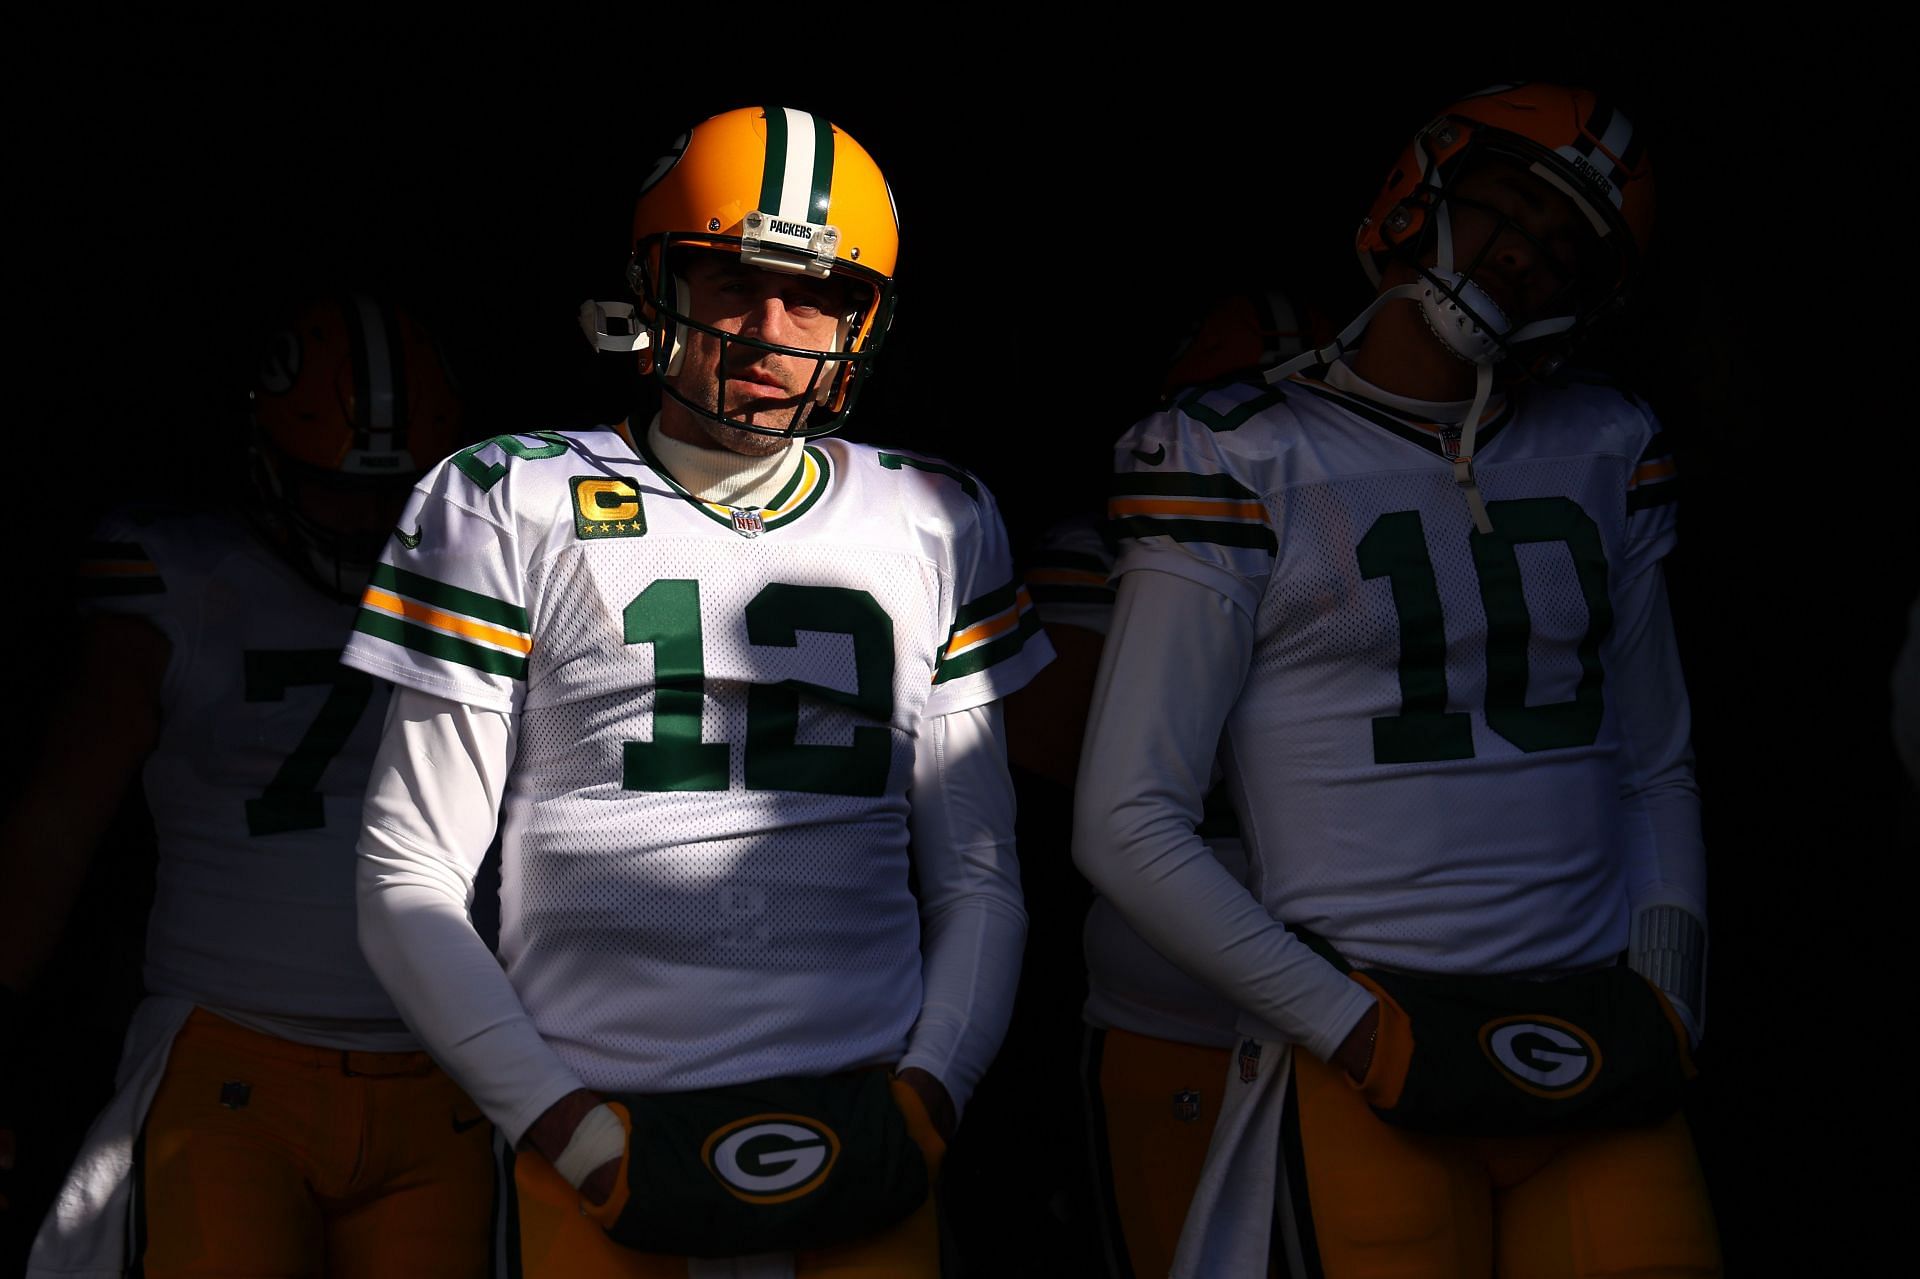 Aaron Rodgers: Green Bay Packers v Chicago Bears